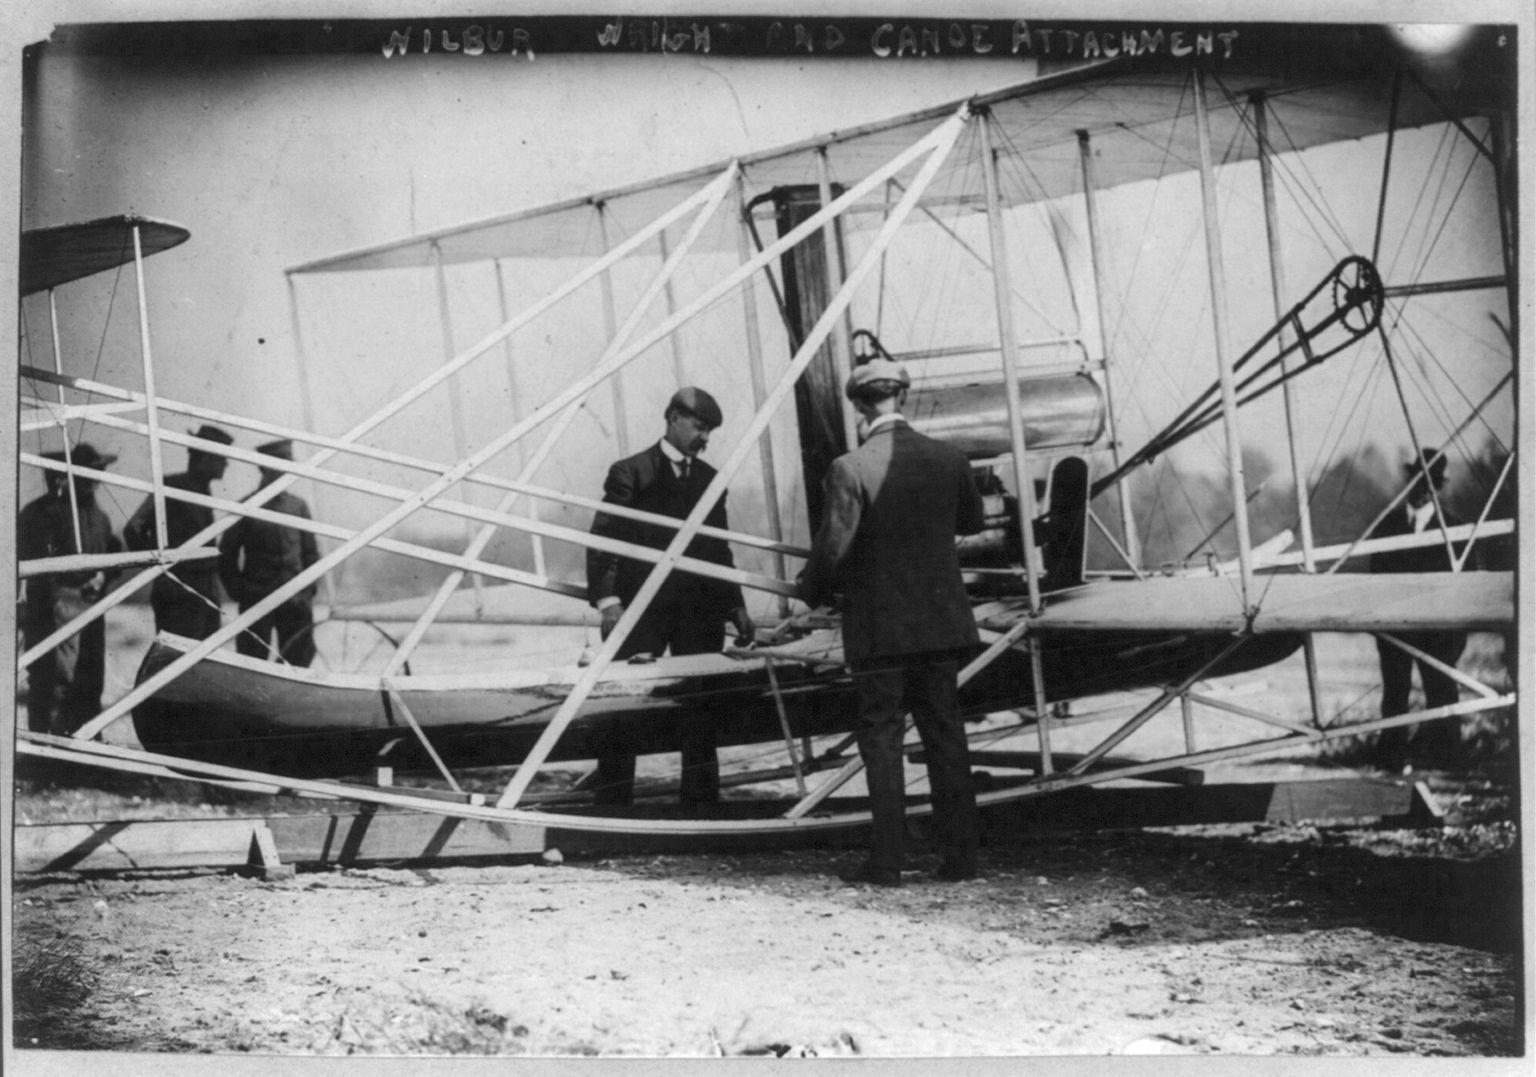 Wilbur Wright and Charles Taylor examining a canoe attachment to an aircraft.